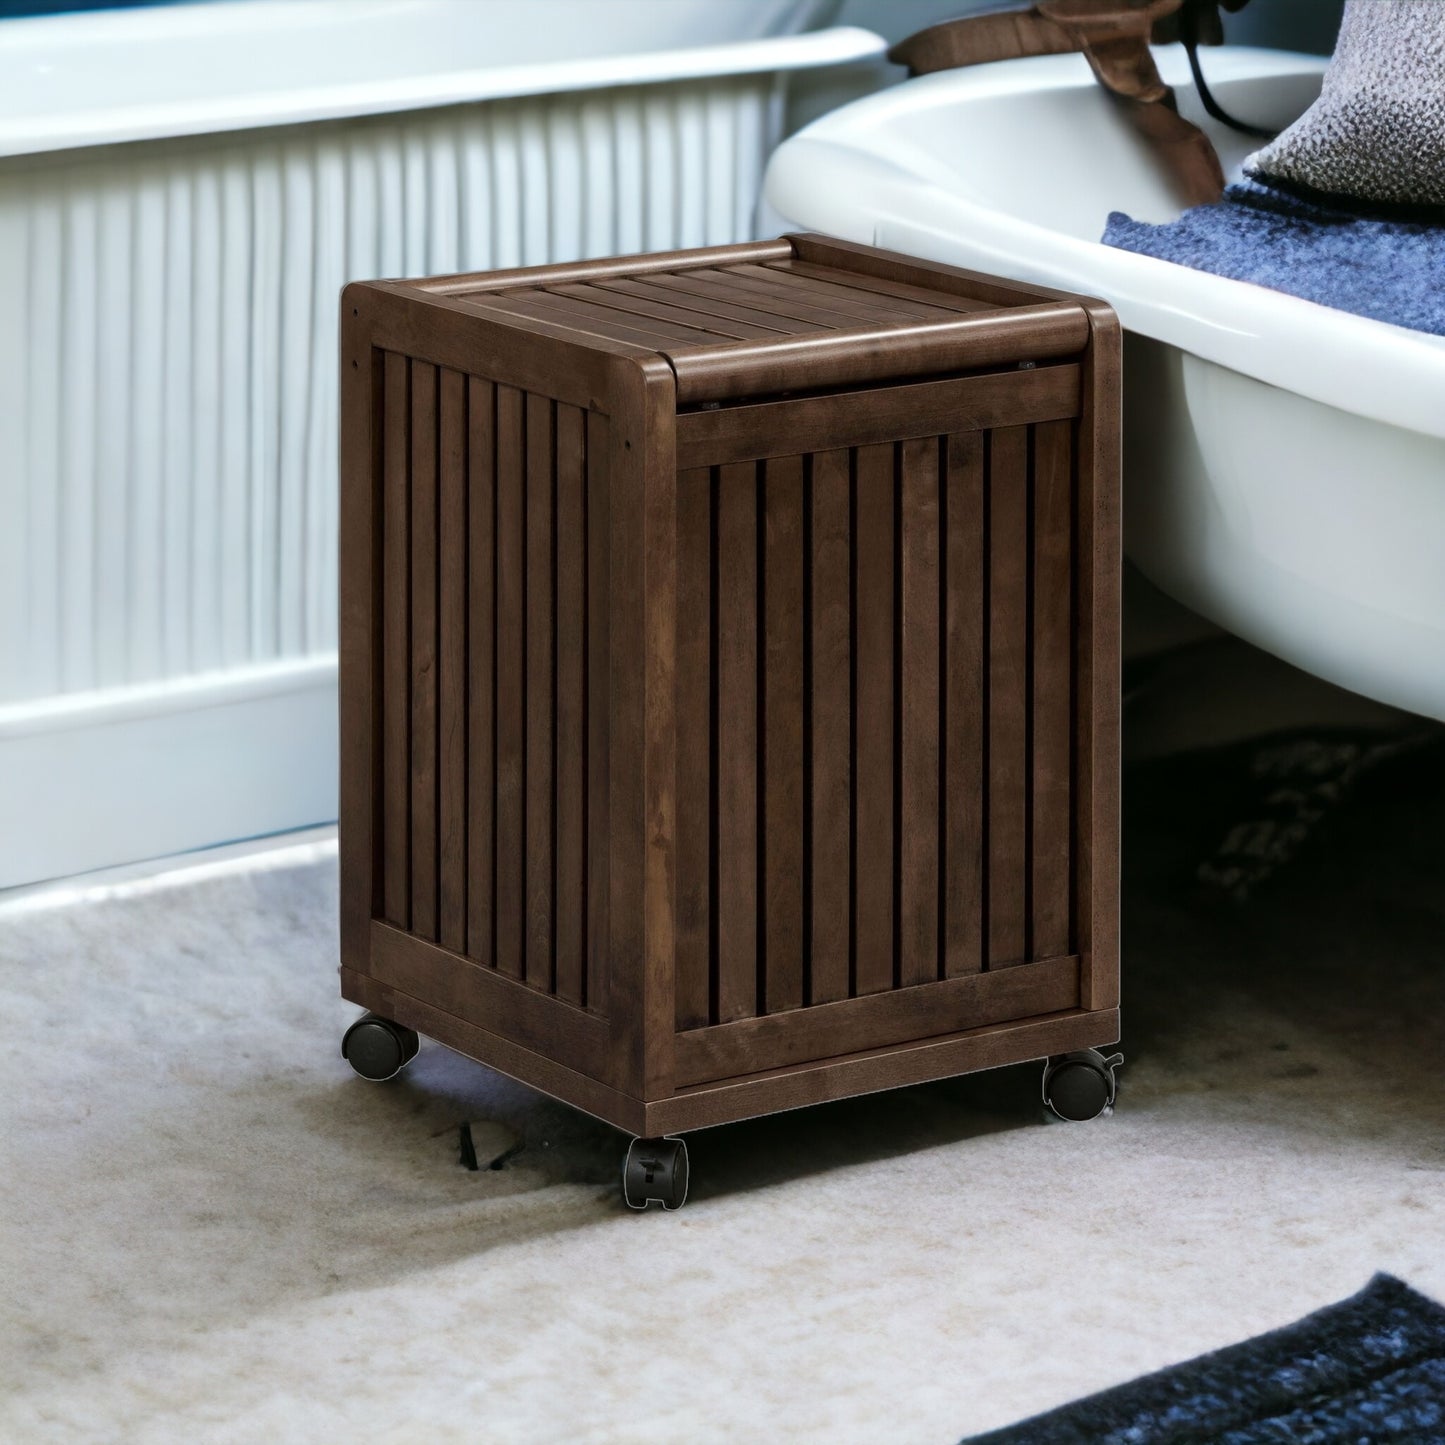 Espresso Solid Wood Rolling Laundry Hamper With Lid